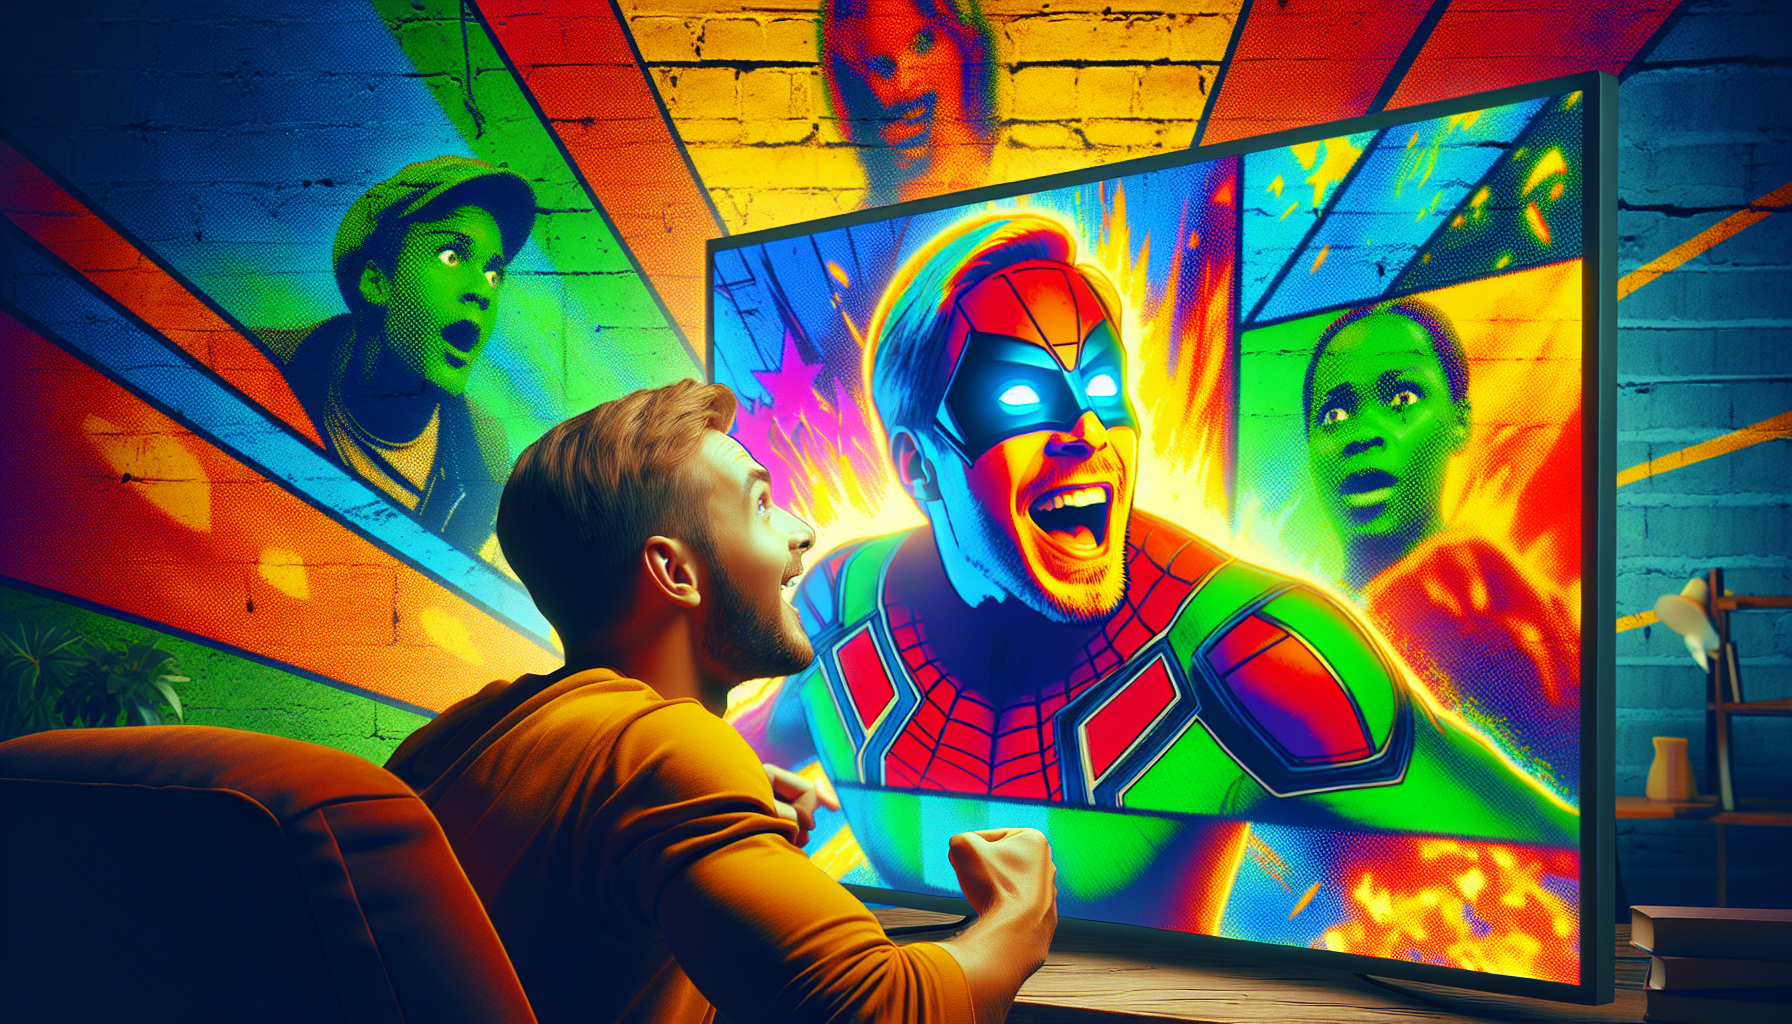 discover if netflix's new superhero series is truly the best show of all time in this captivating exploration of superpowers, heroism, and entertainment.